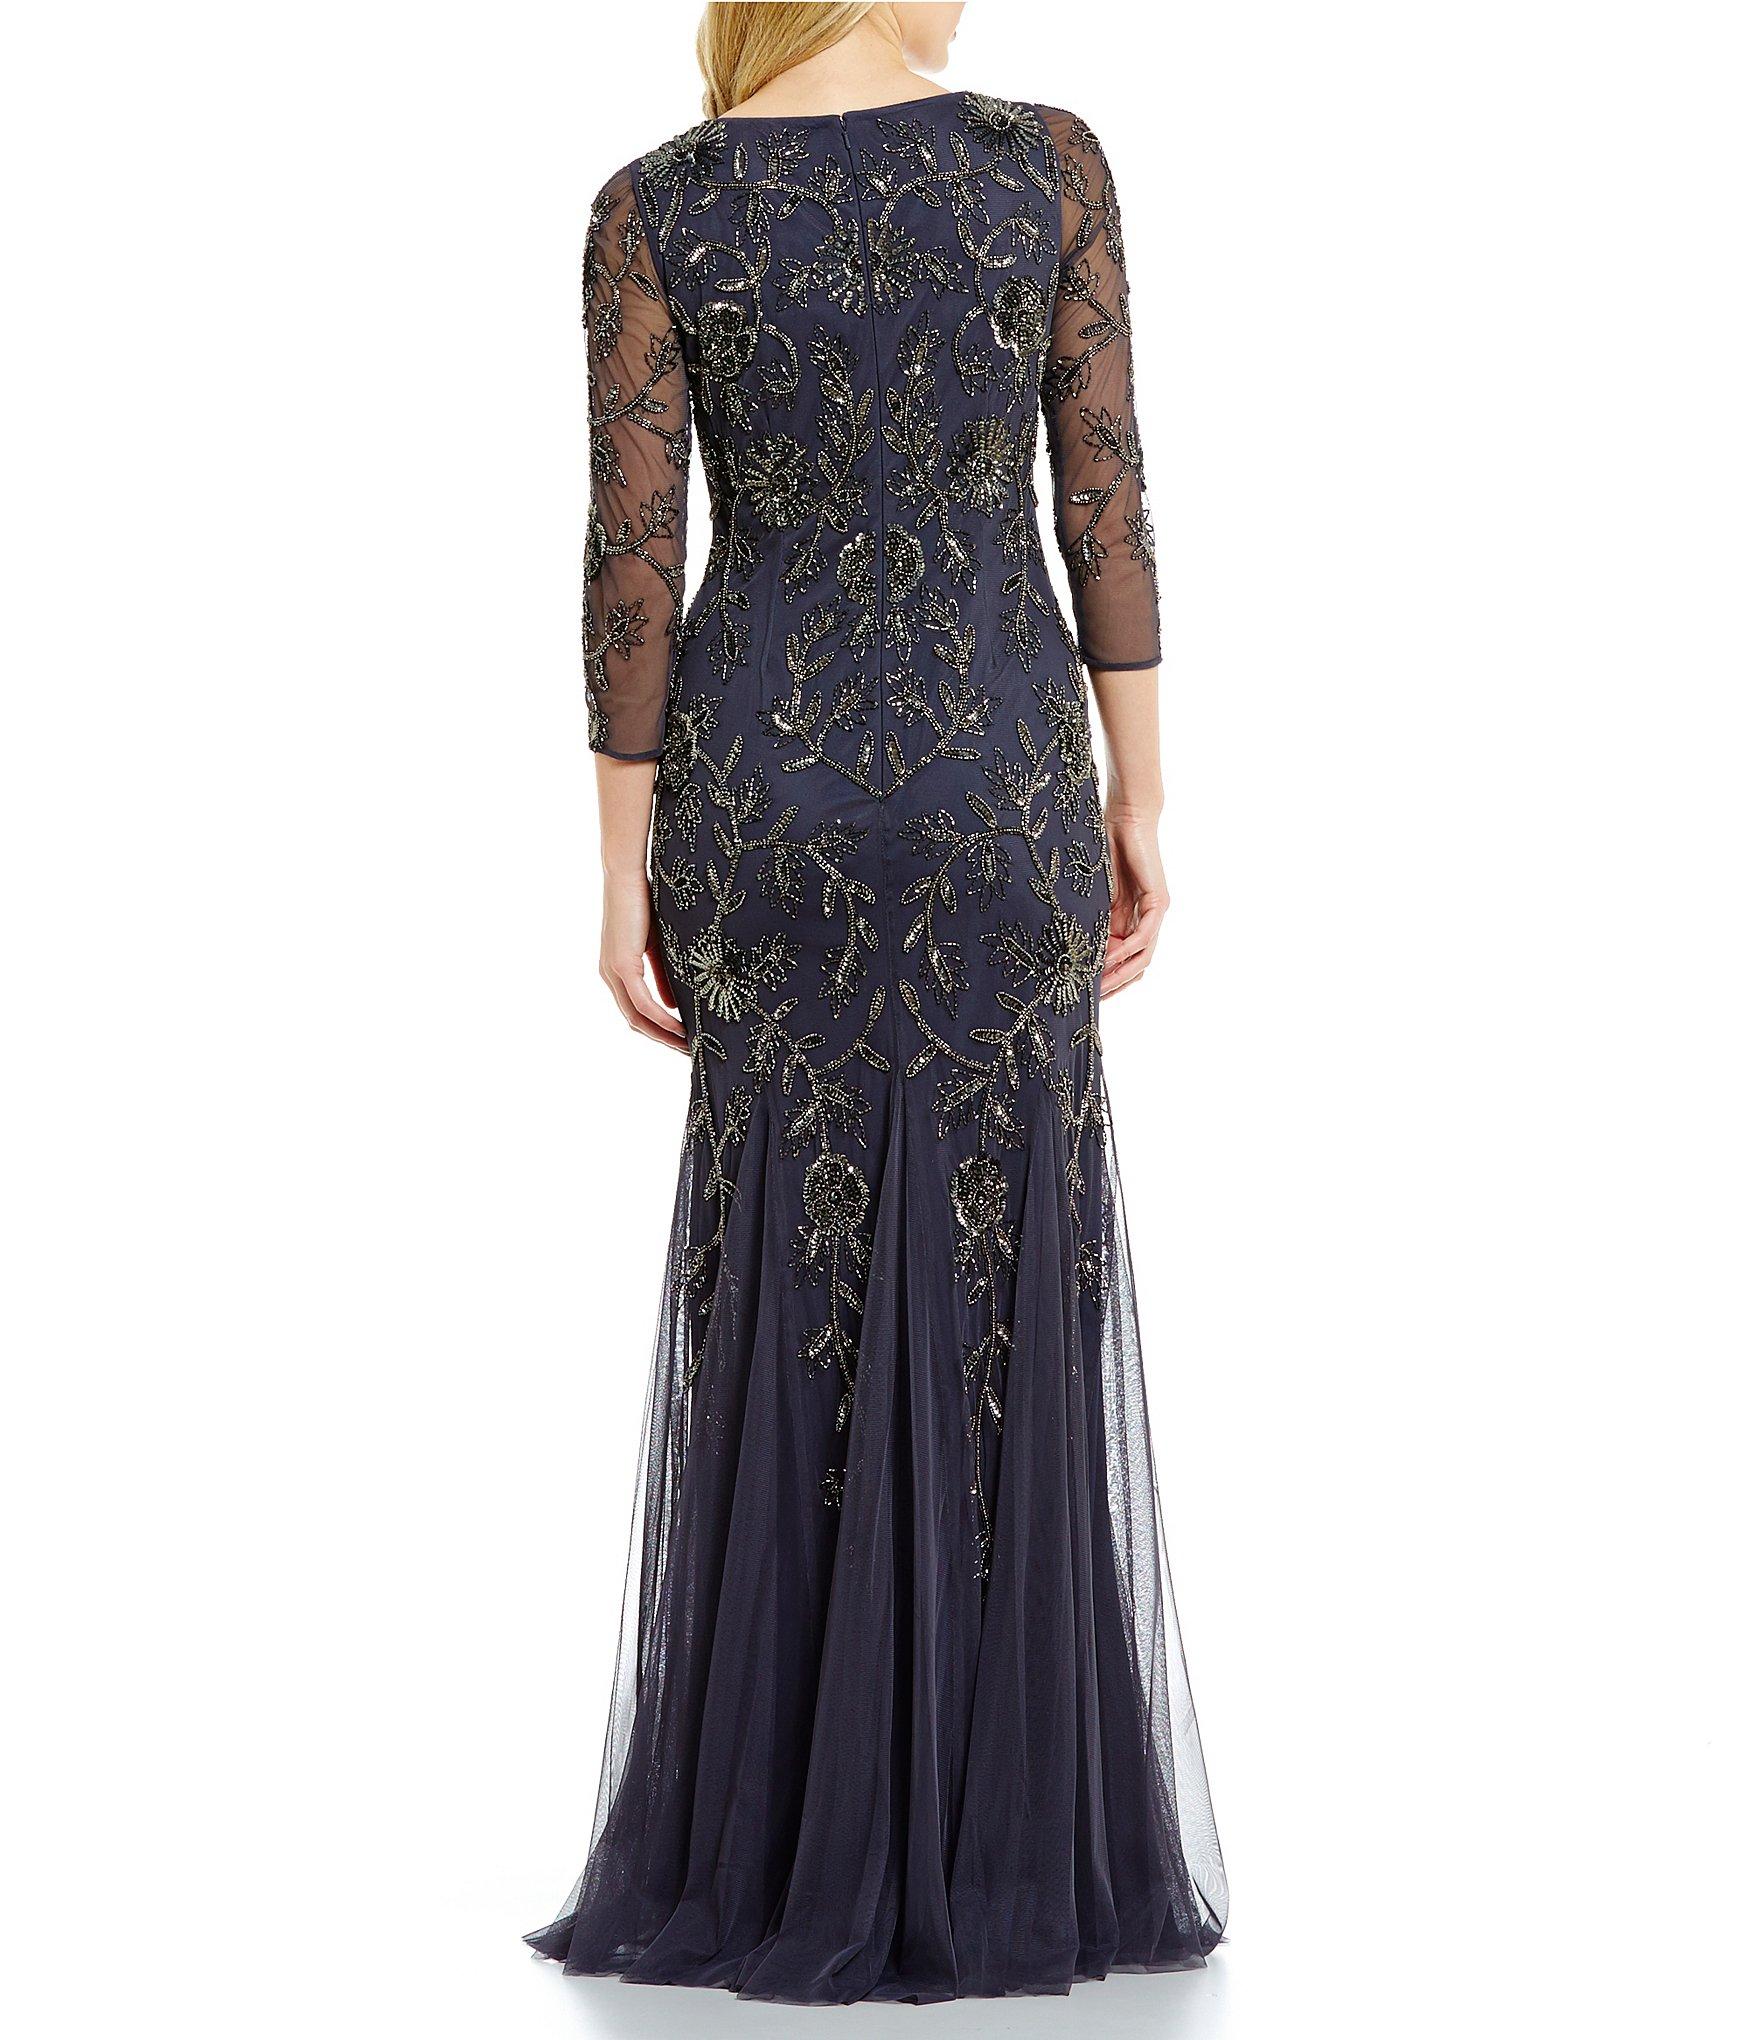 Lyst - Adrianna papell Beaded Round Neck Mermaid Gown